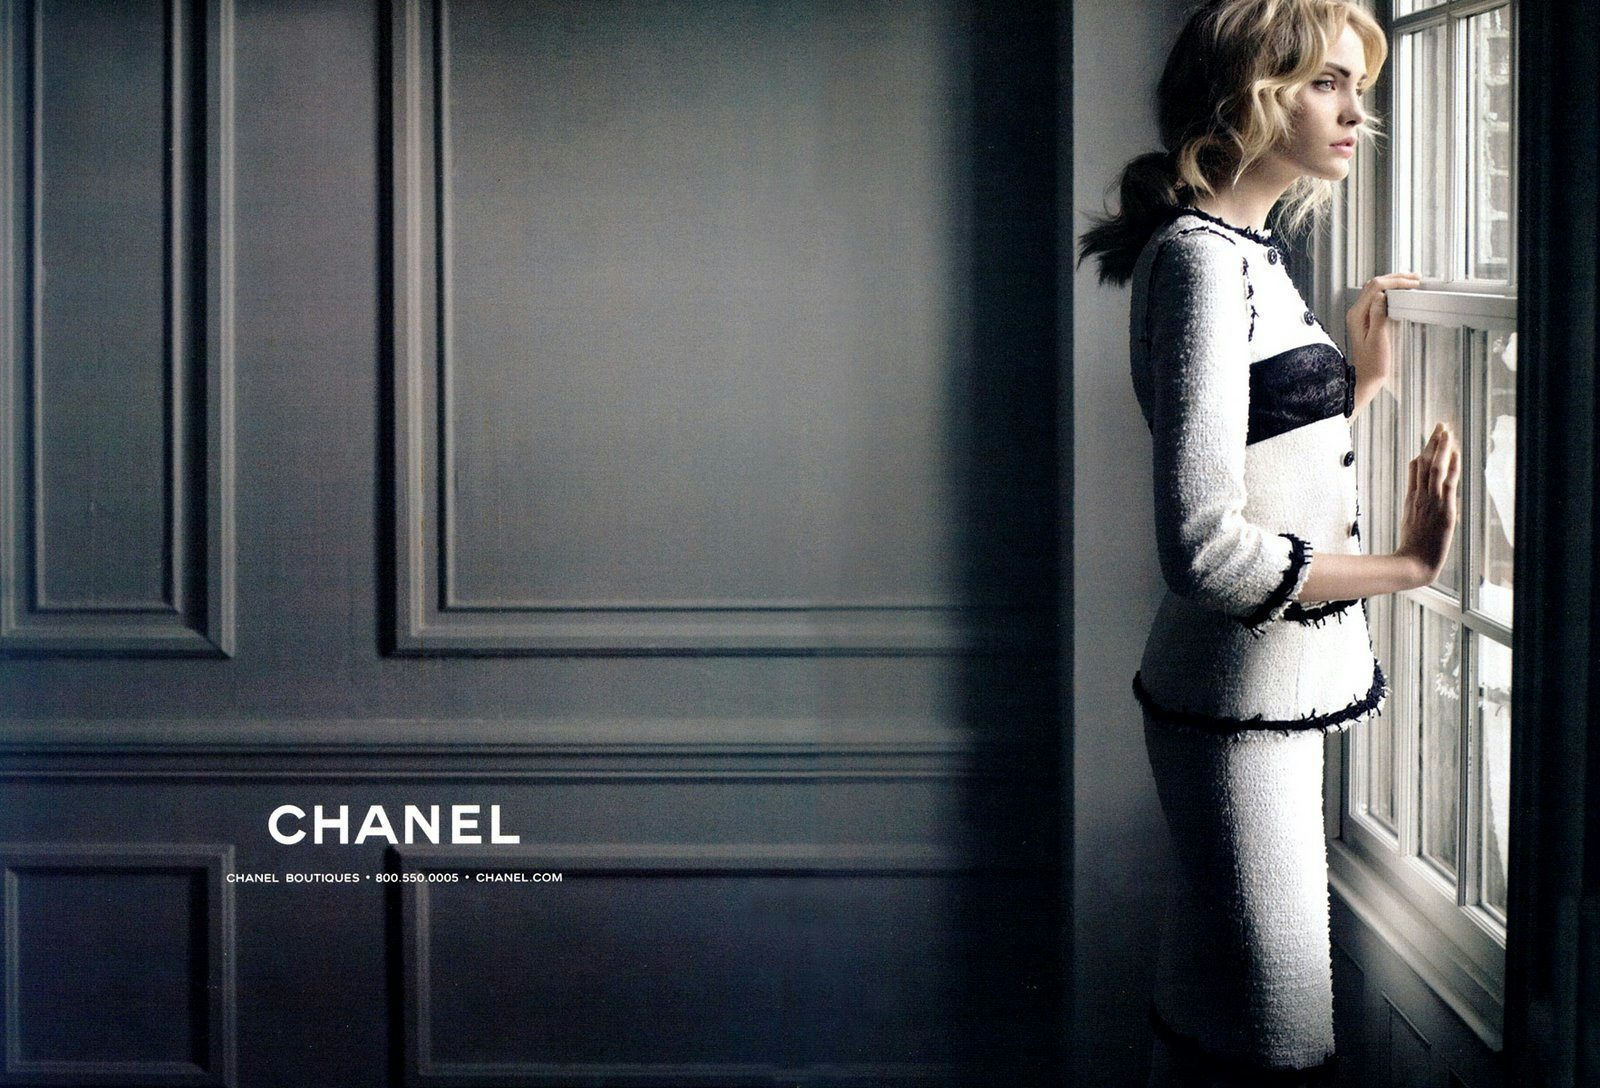 Chanel: 'Digital should not be a department'